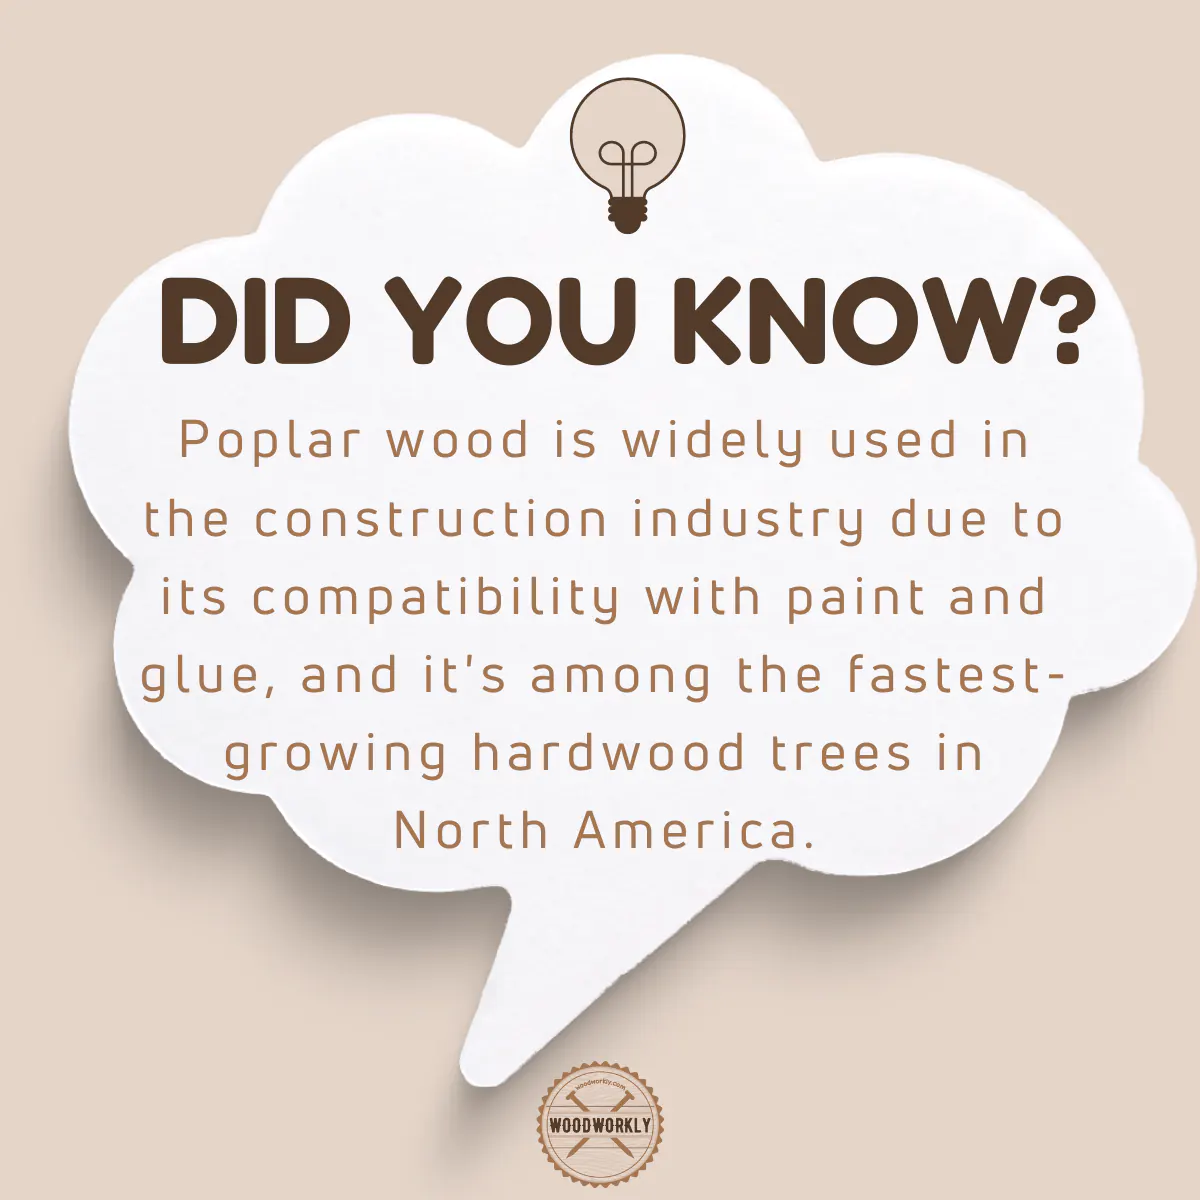 Did you know fact about Poplar wood